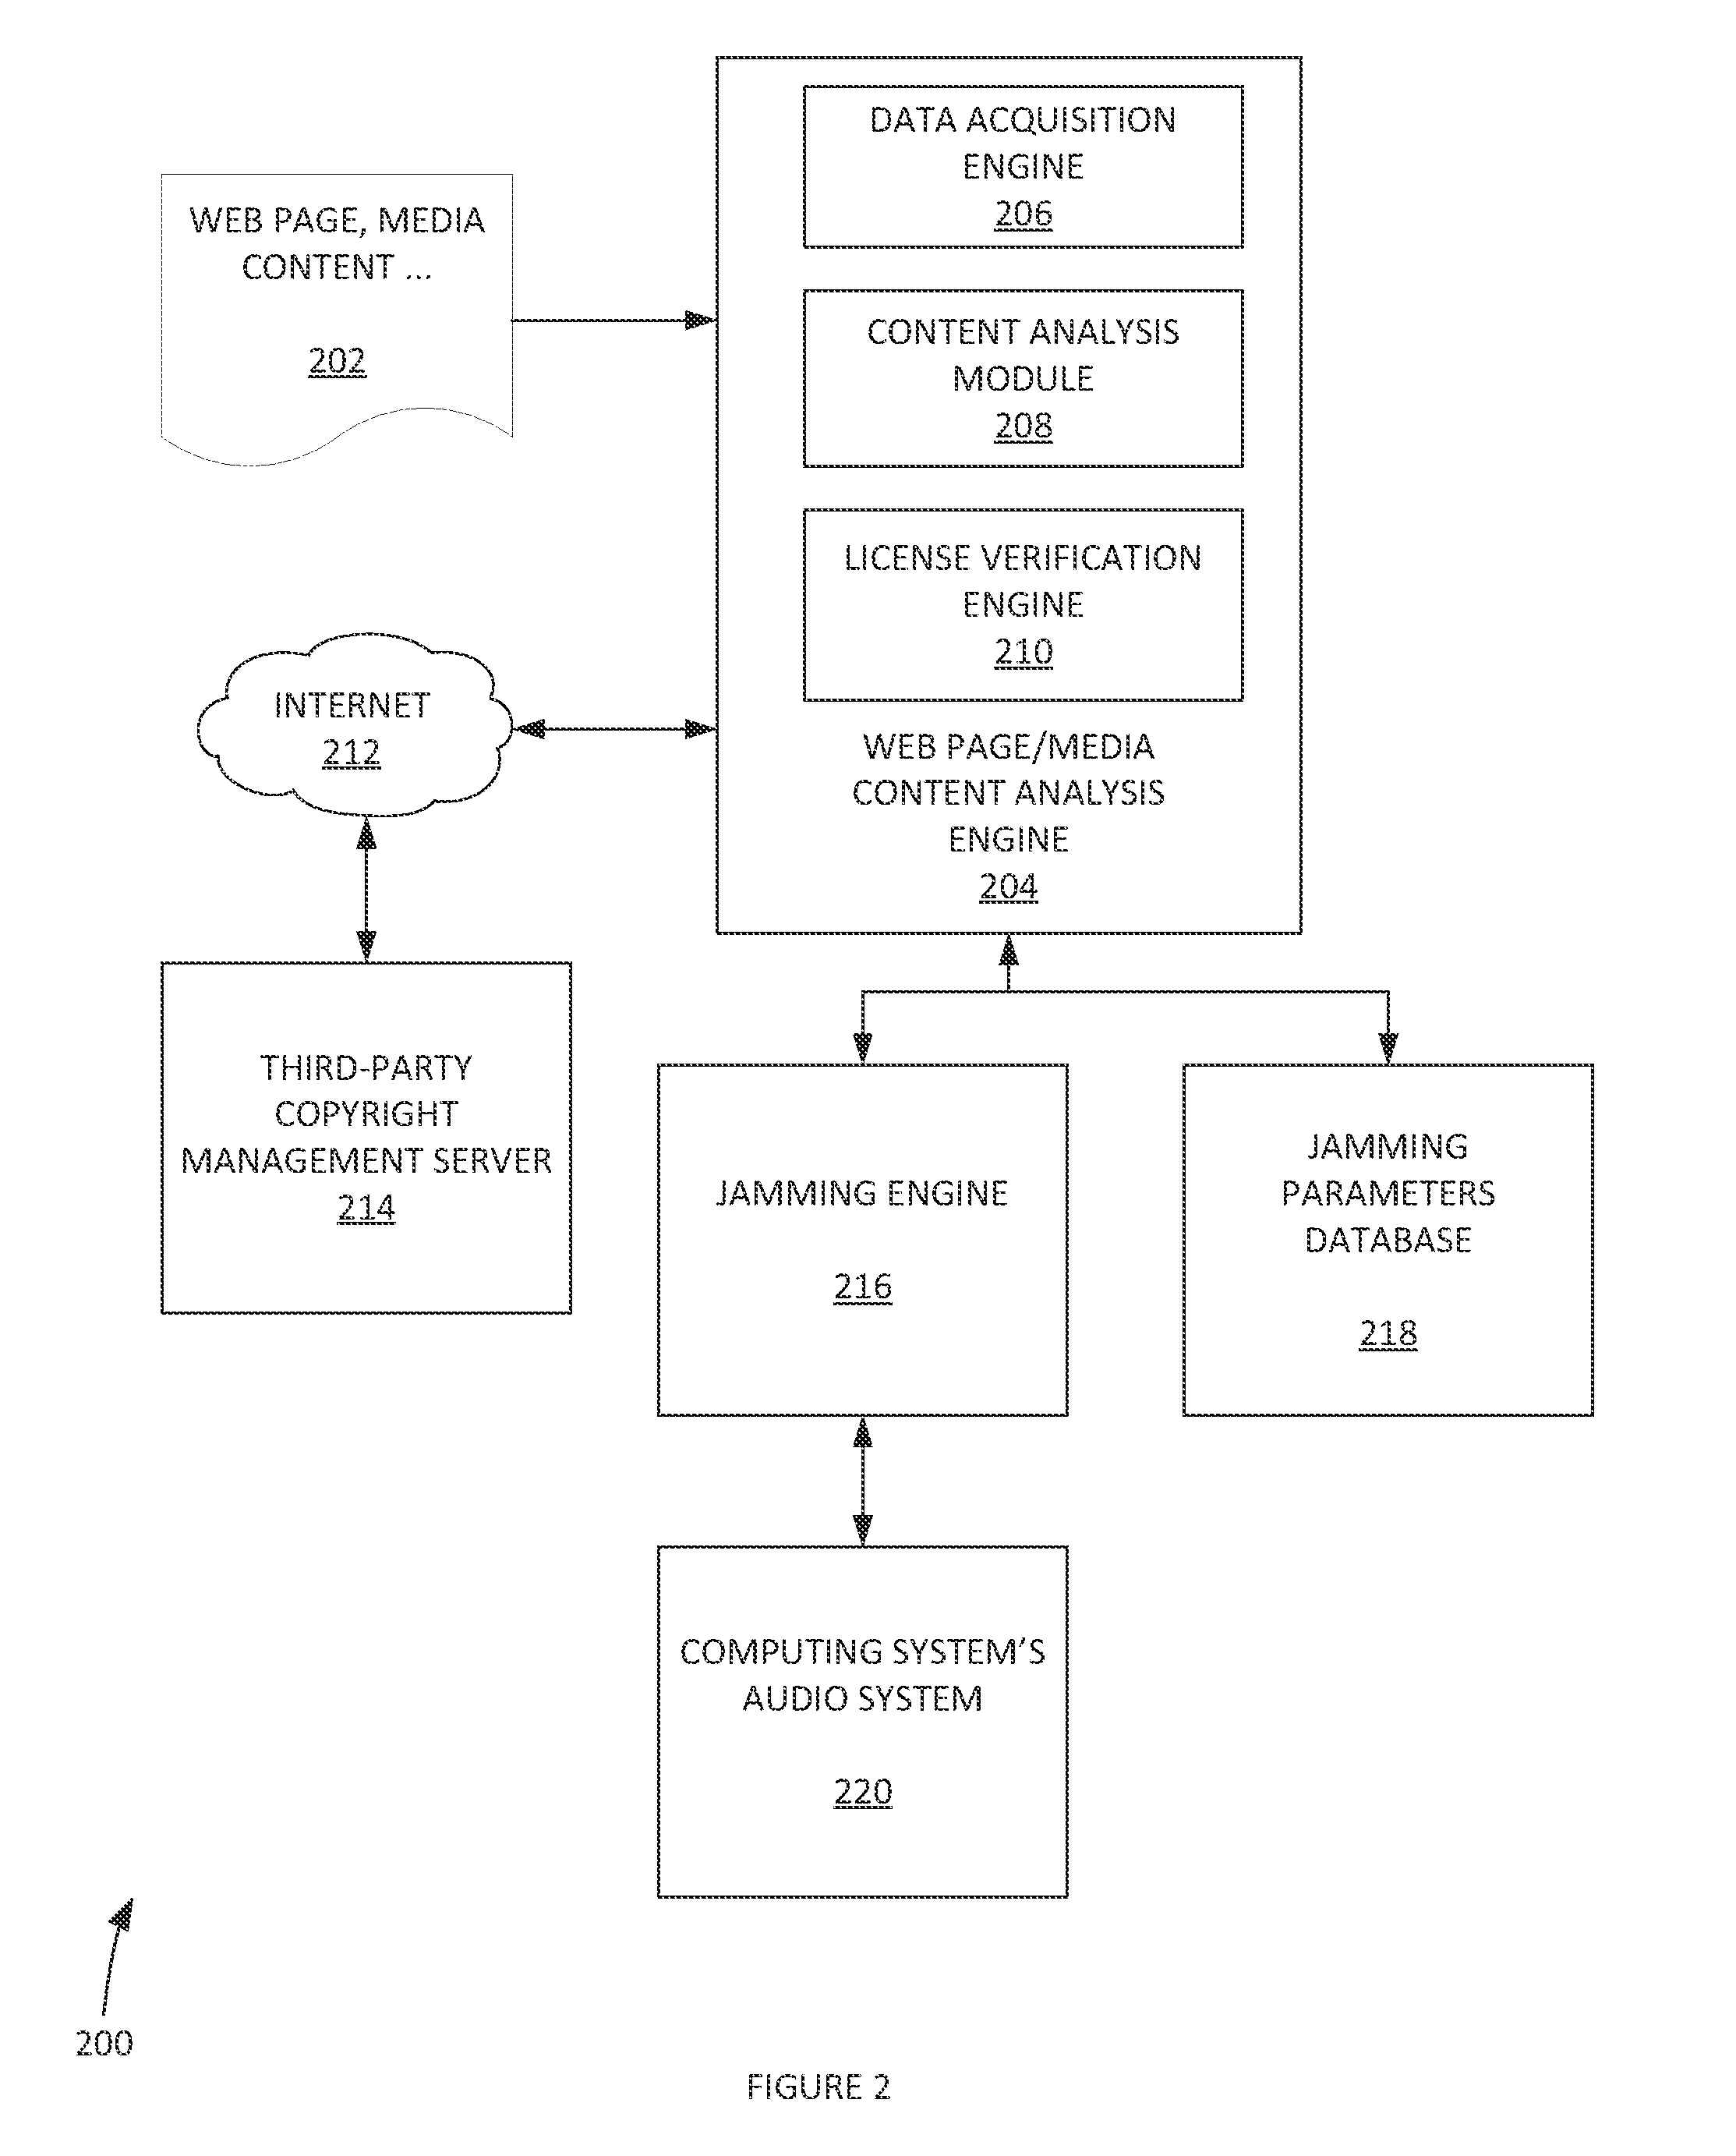 Method and system of jamming specified media content by age category